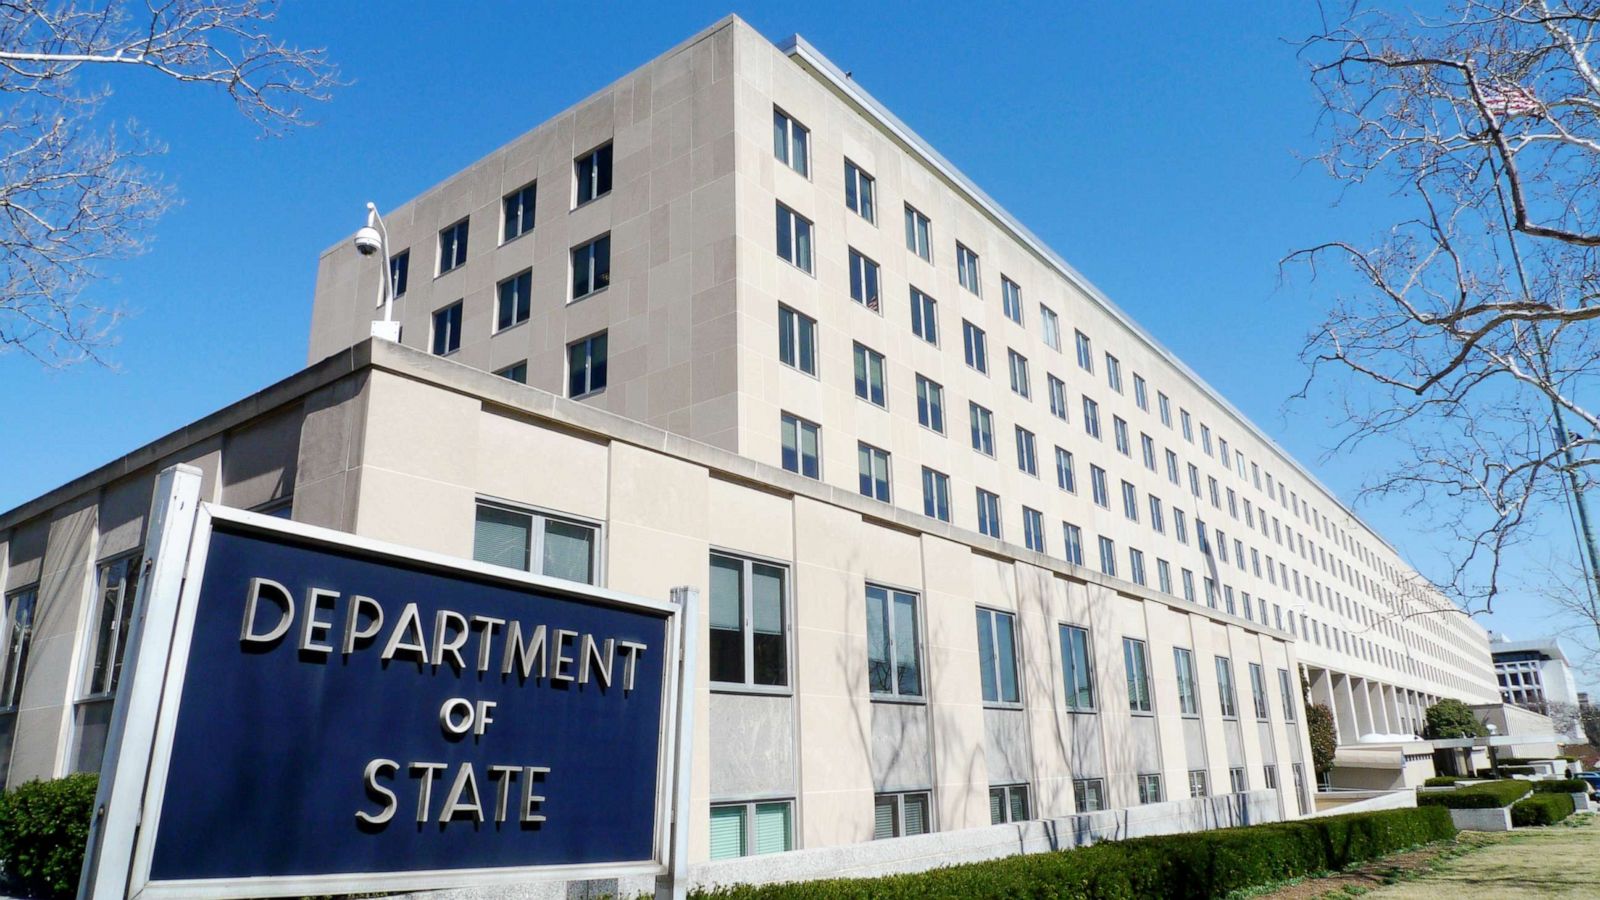 Office of the Chief of Protocol - United States Department of State